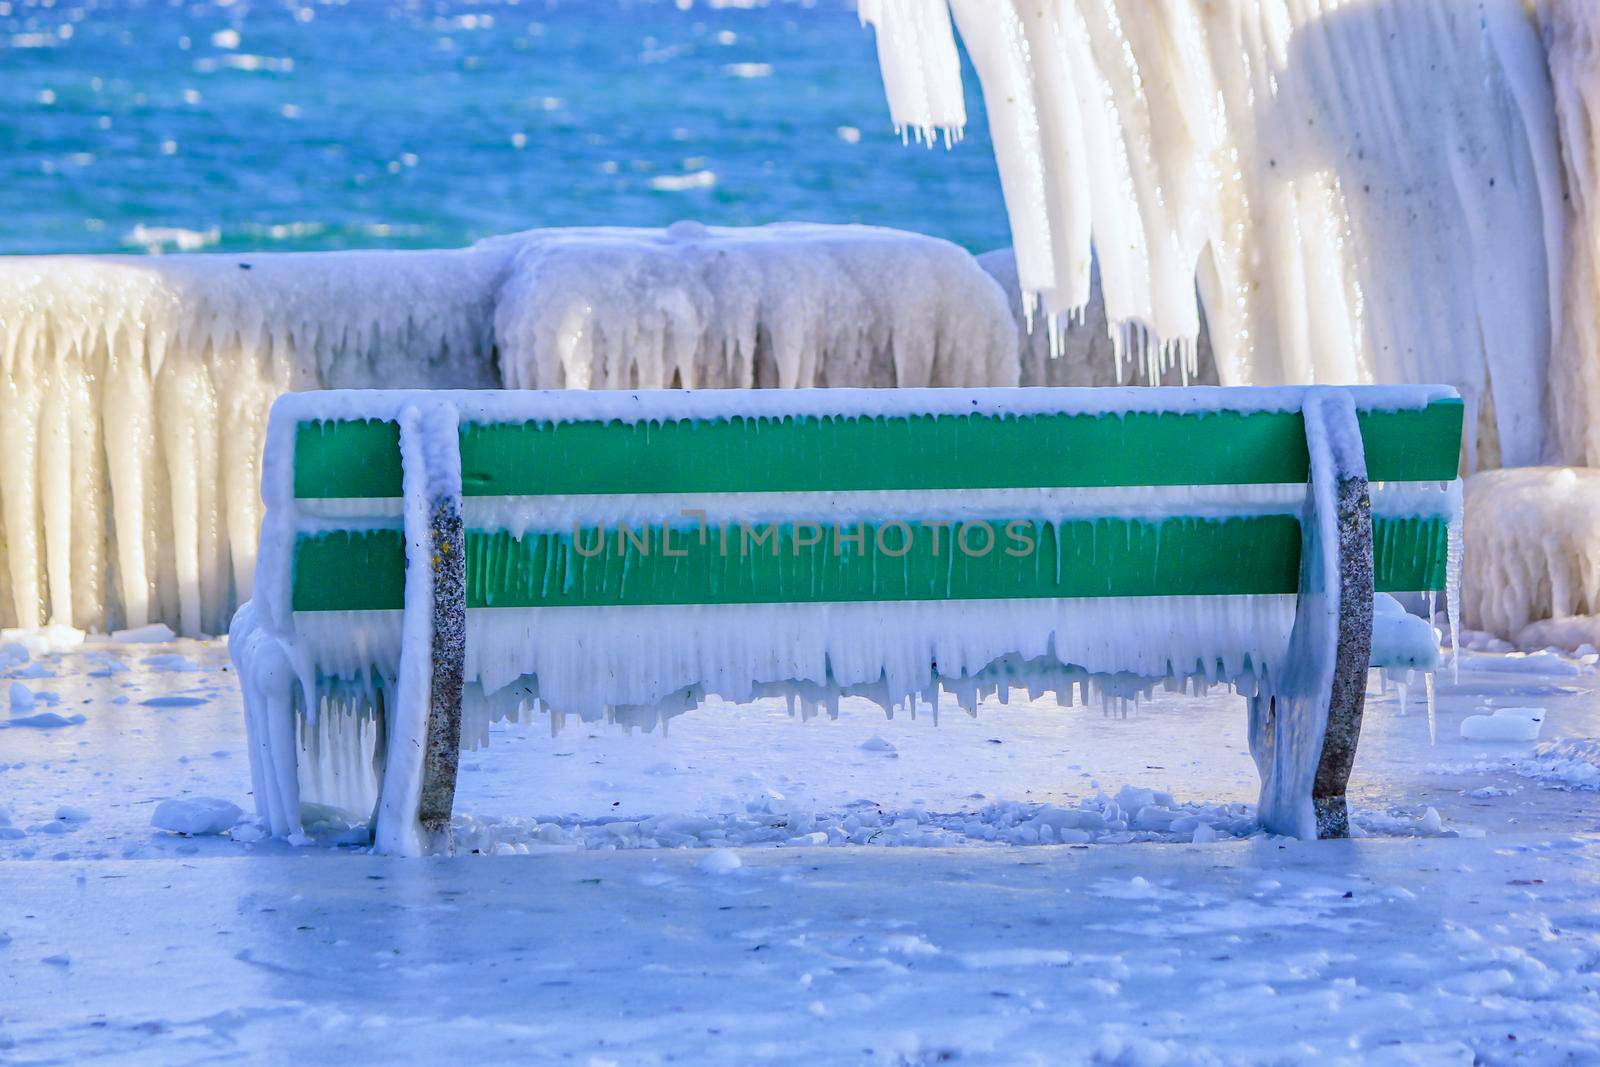 Frozen bench by very cold winter, Versoix, Switzerland by Elenaphotos21